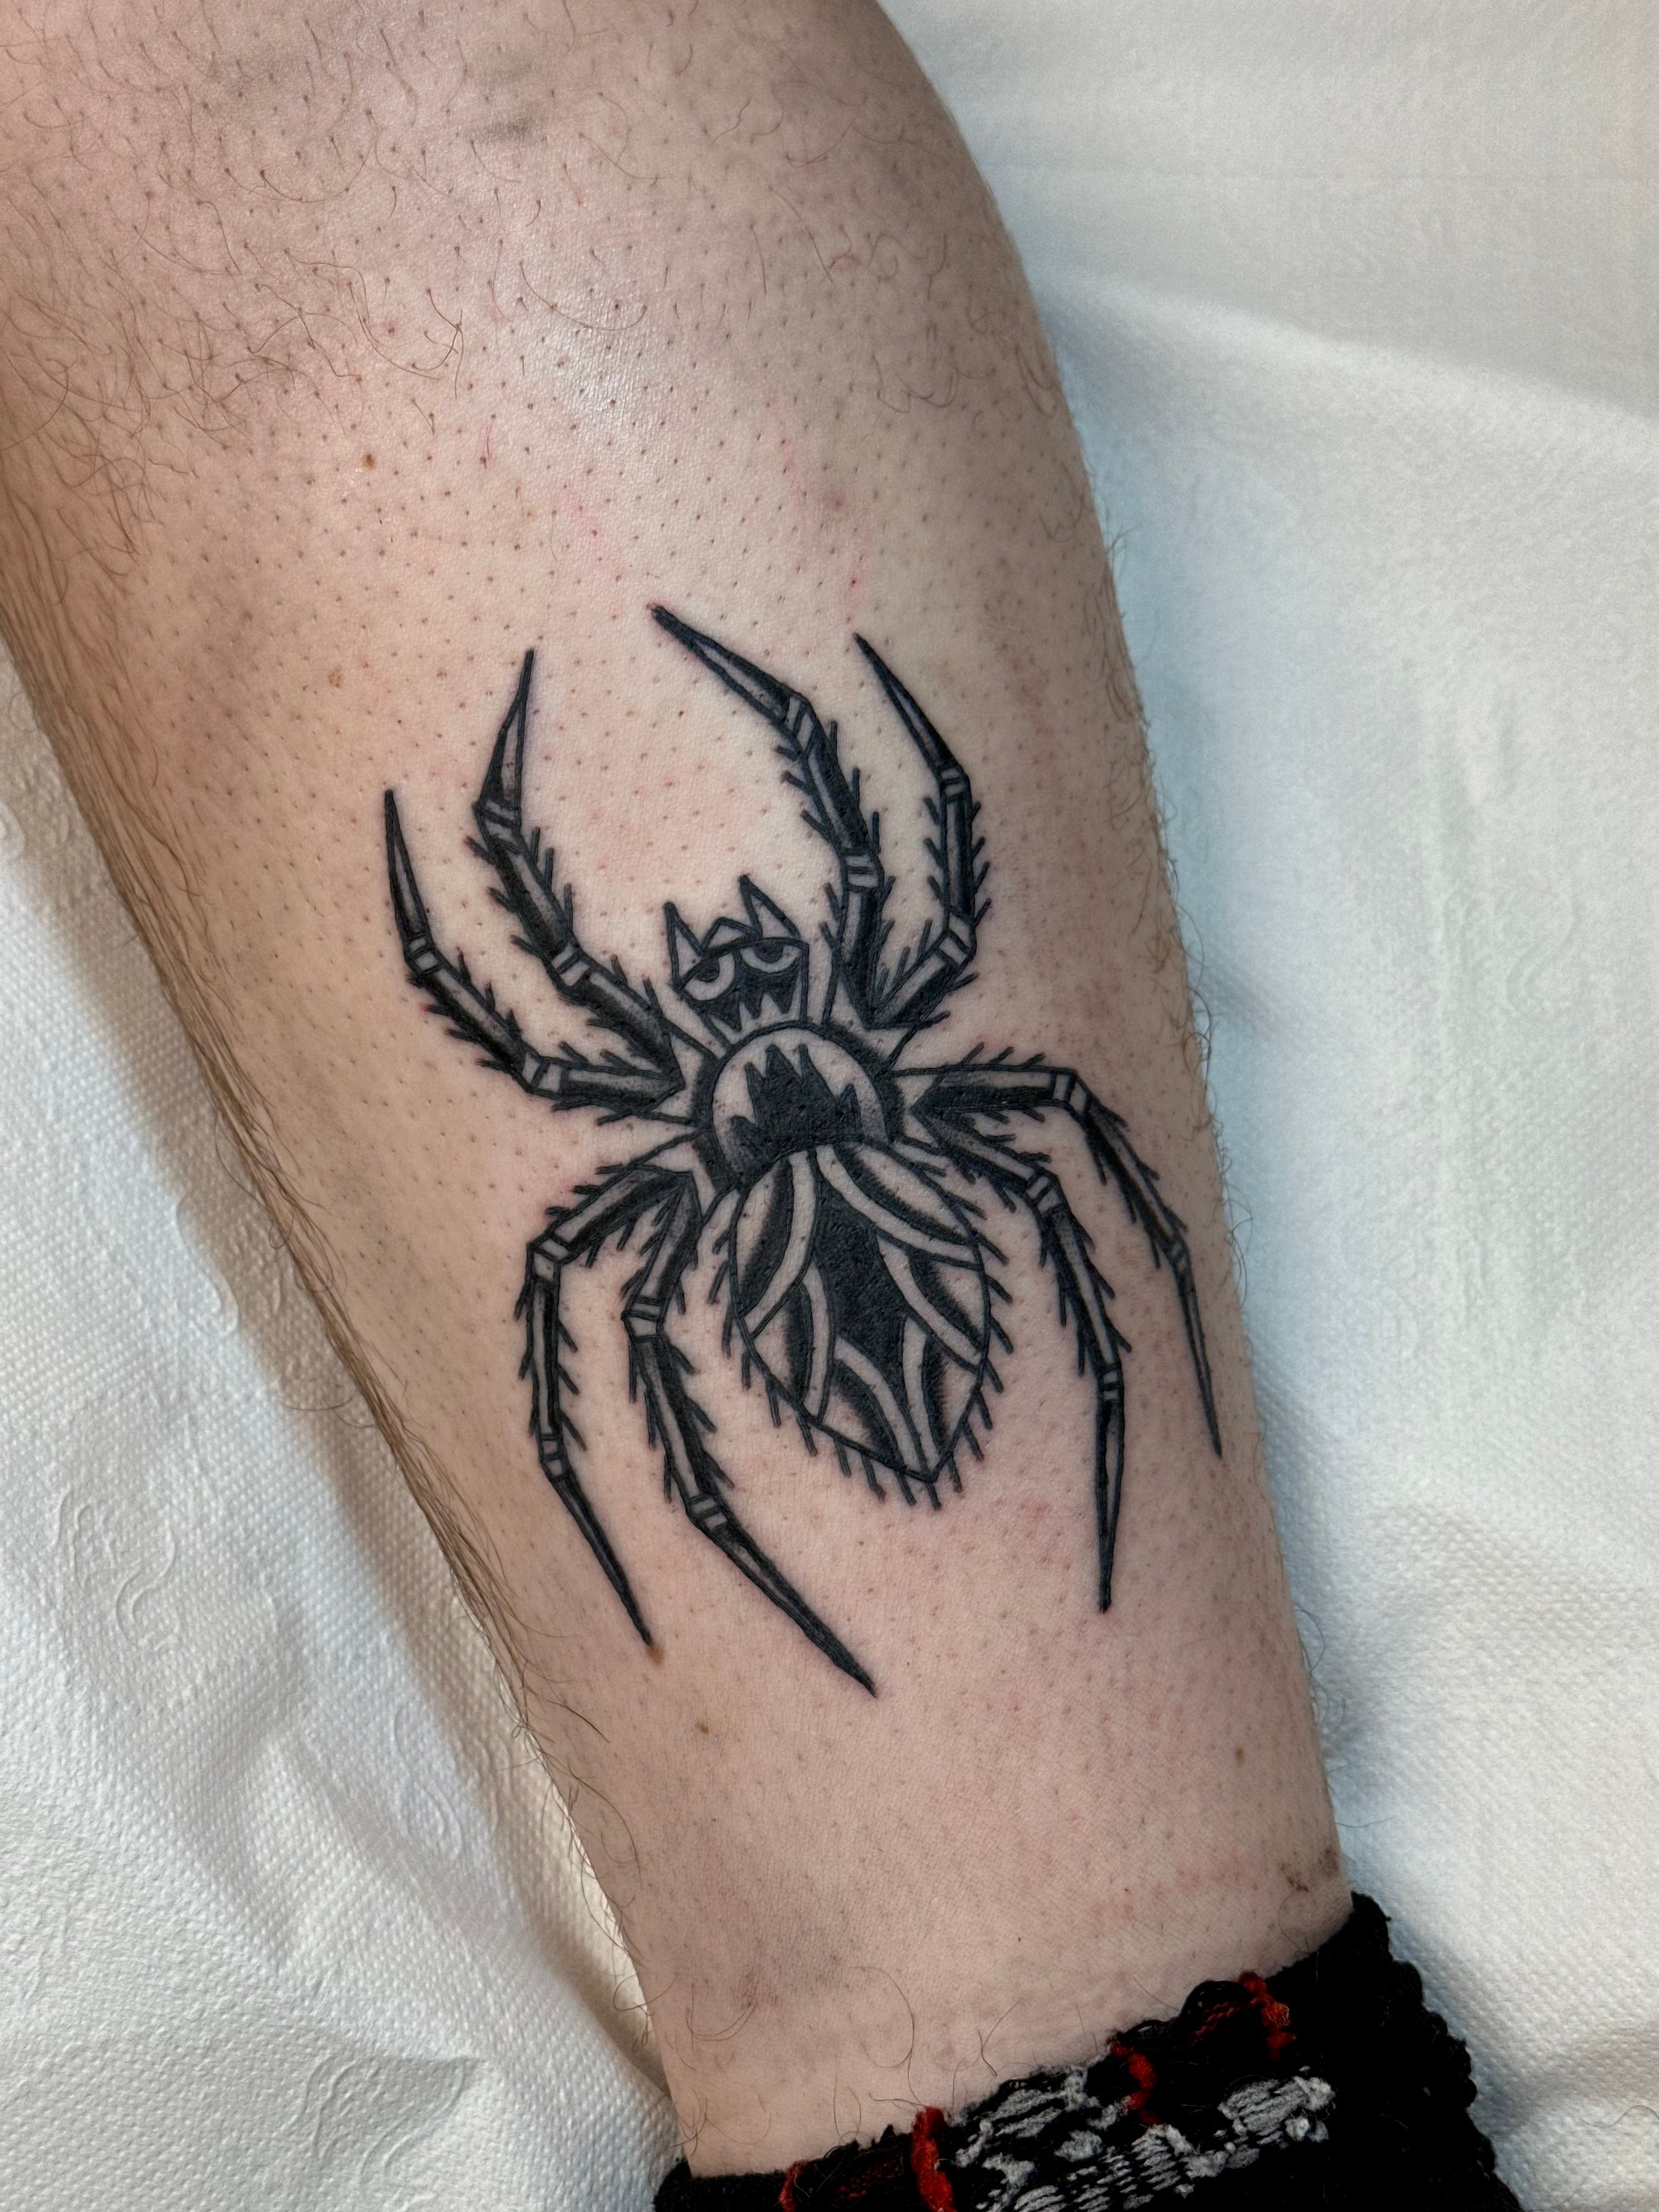 Wolf spider 🕷 by... - Just Another Hole in the Wall Tattoo | Facebook